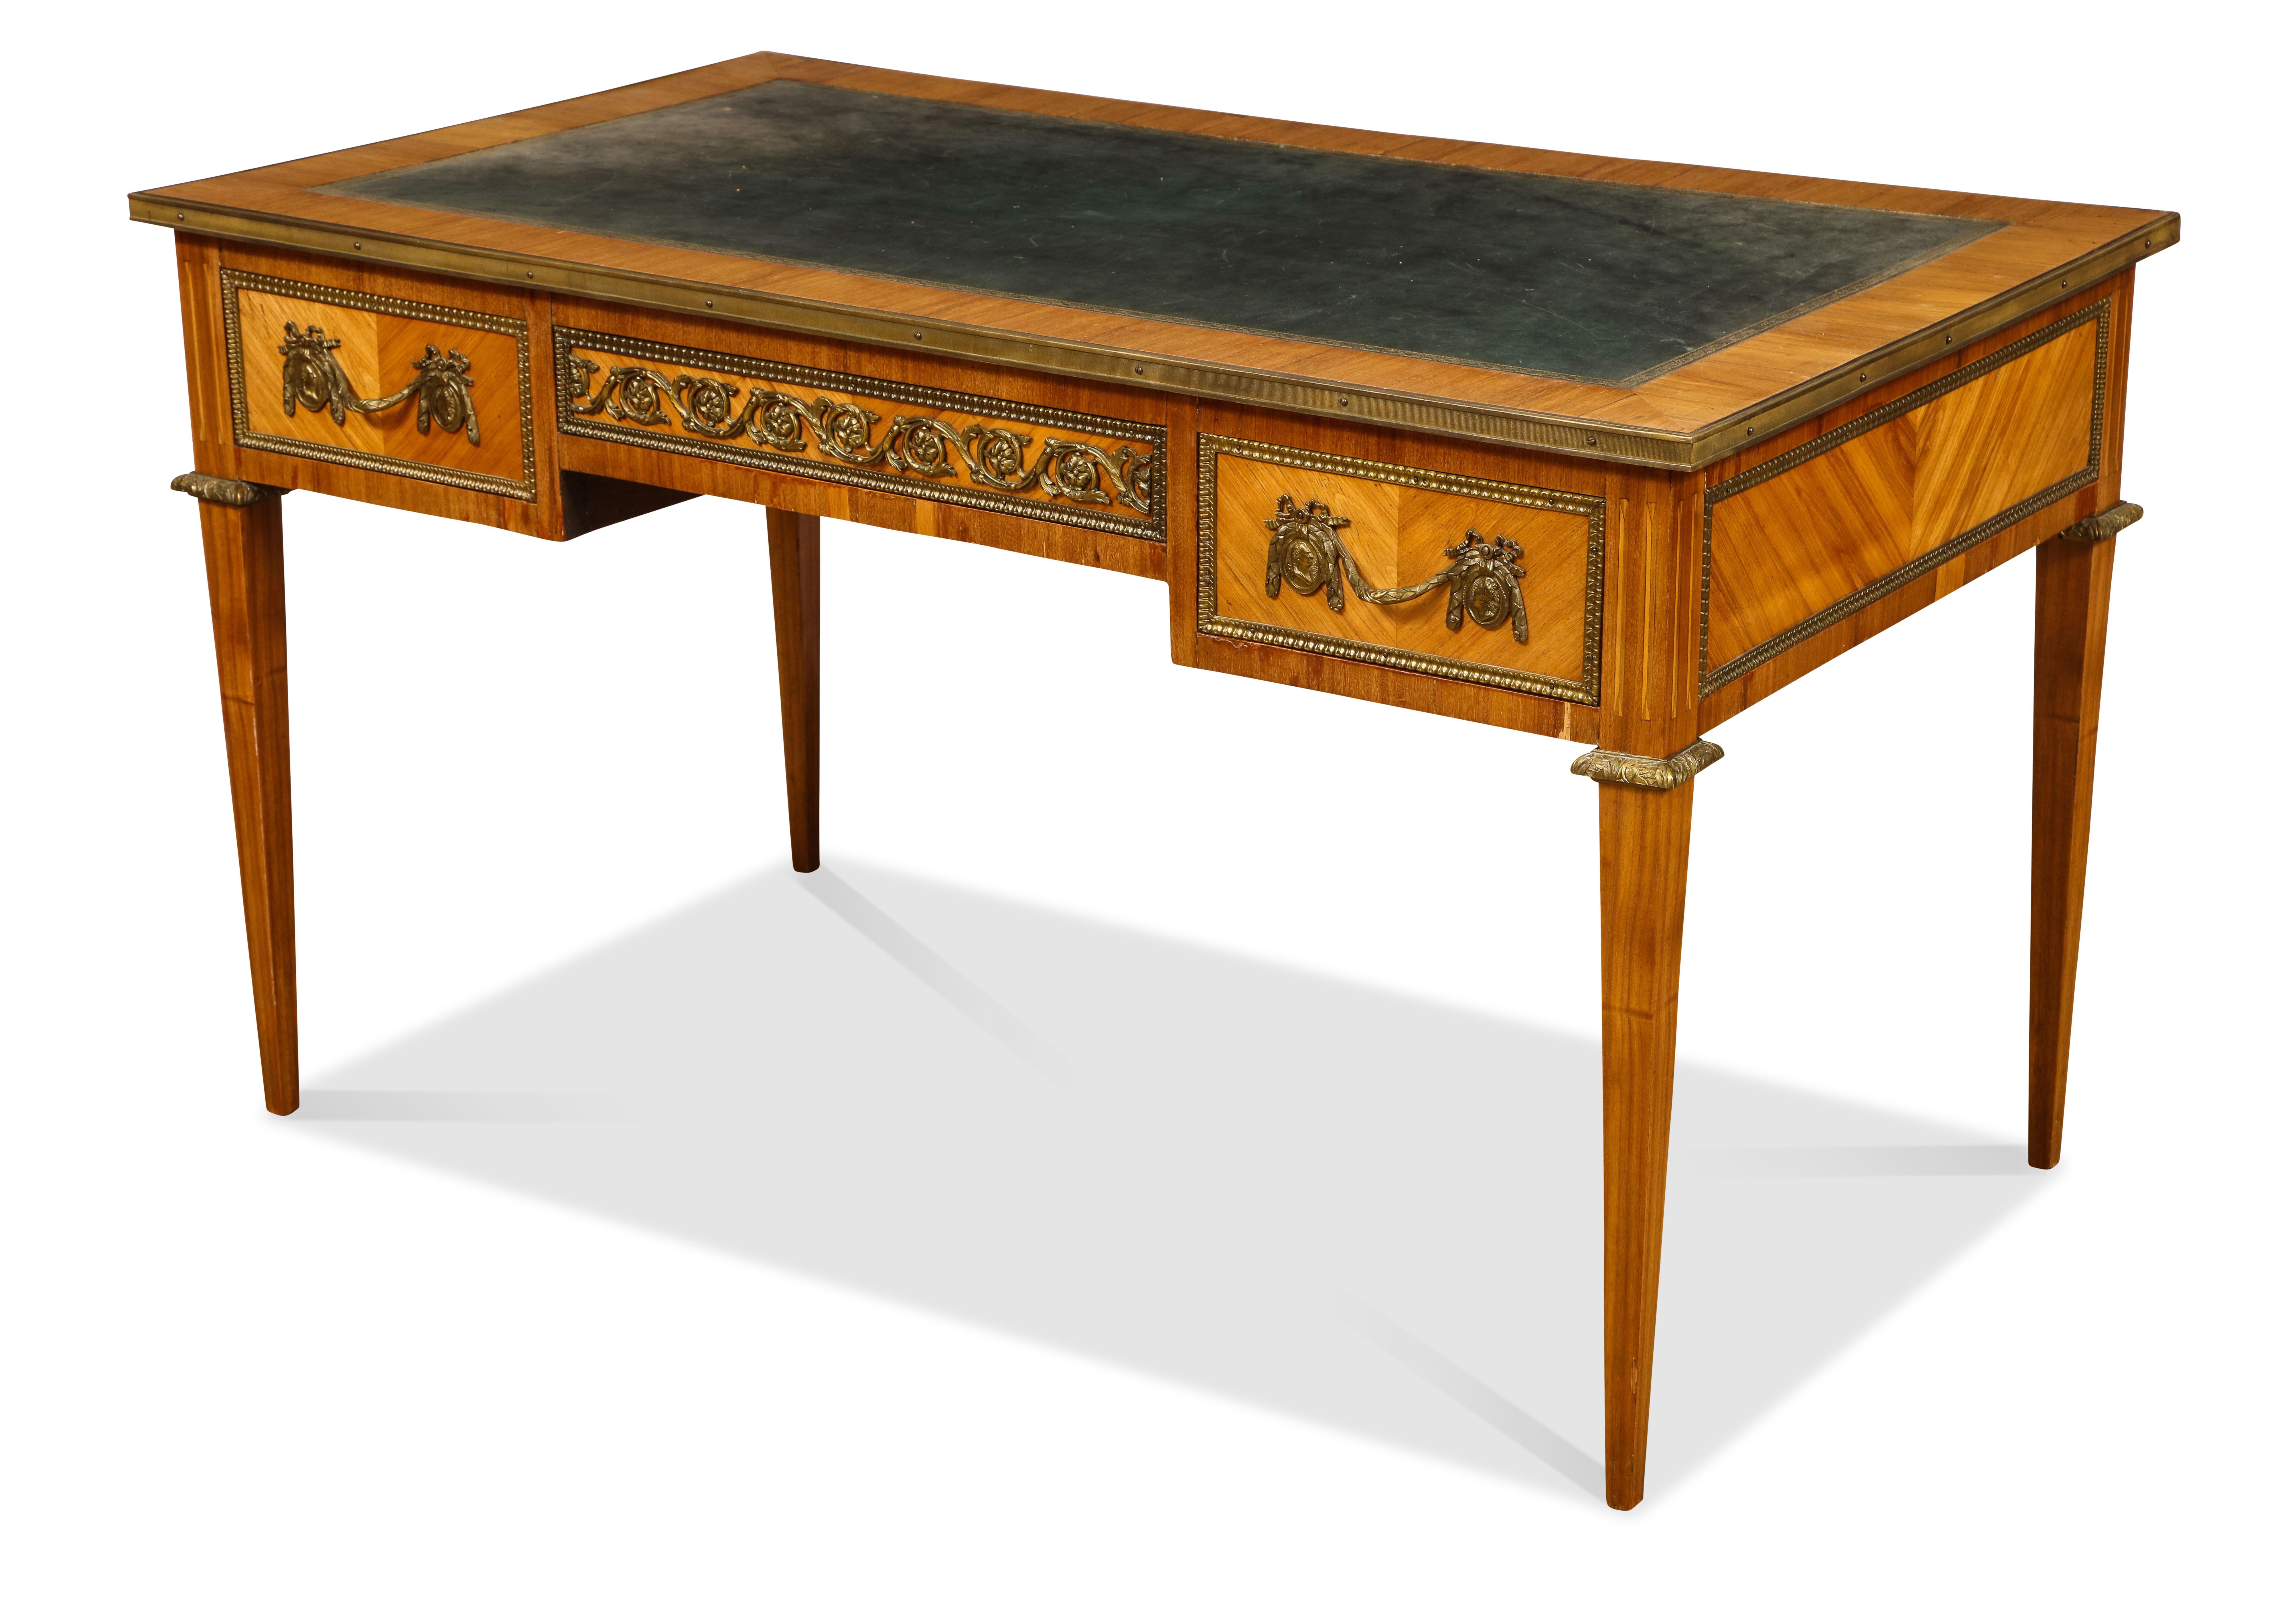 The all-over parquetry veneered fruit-wood desk having 3 drawers on one side and 3 faux drawers on the opposite side. The whole with bronze mounts.
     